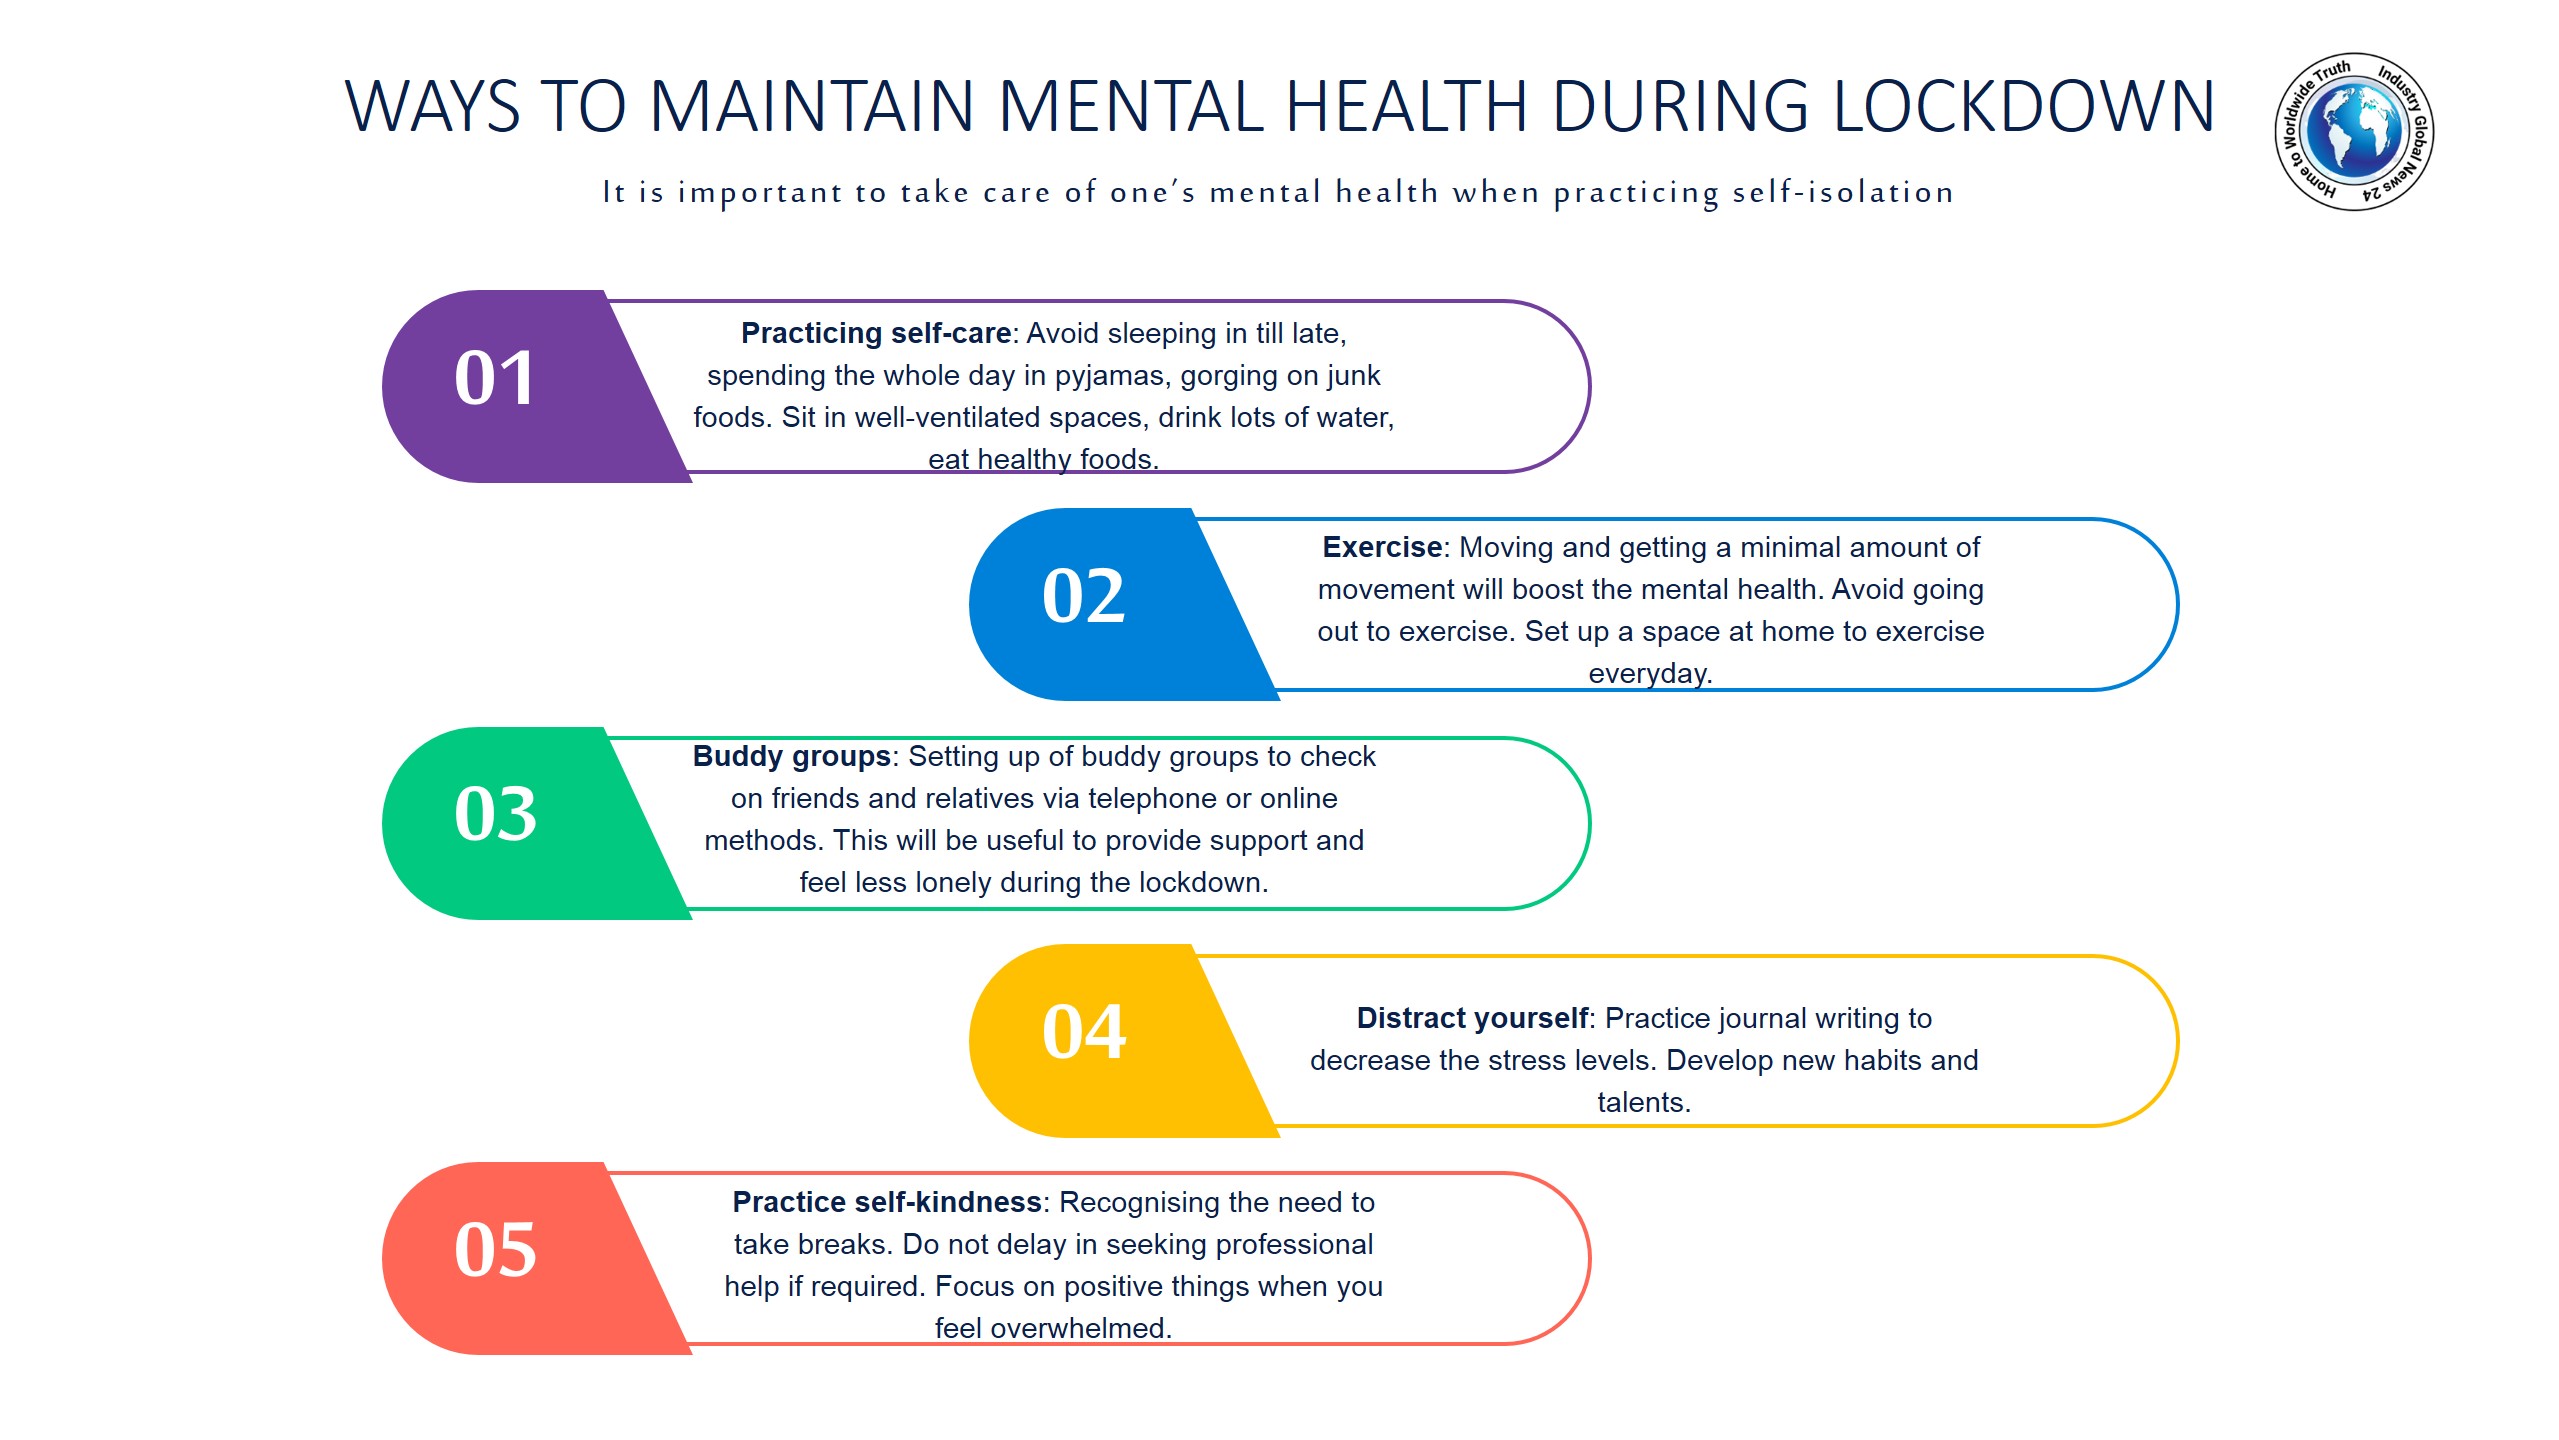 Ways to maintain mental health during lockdown